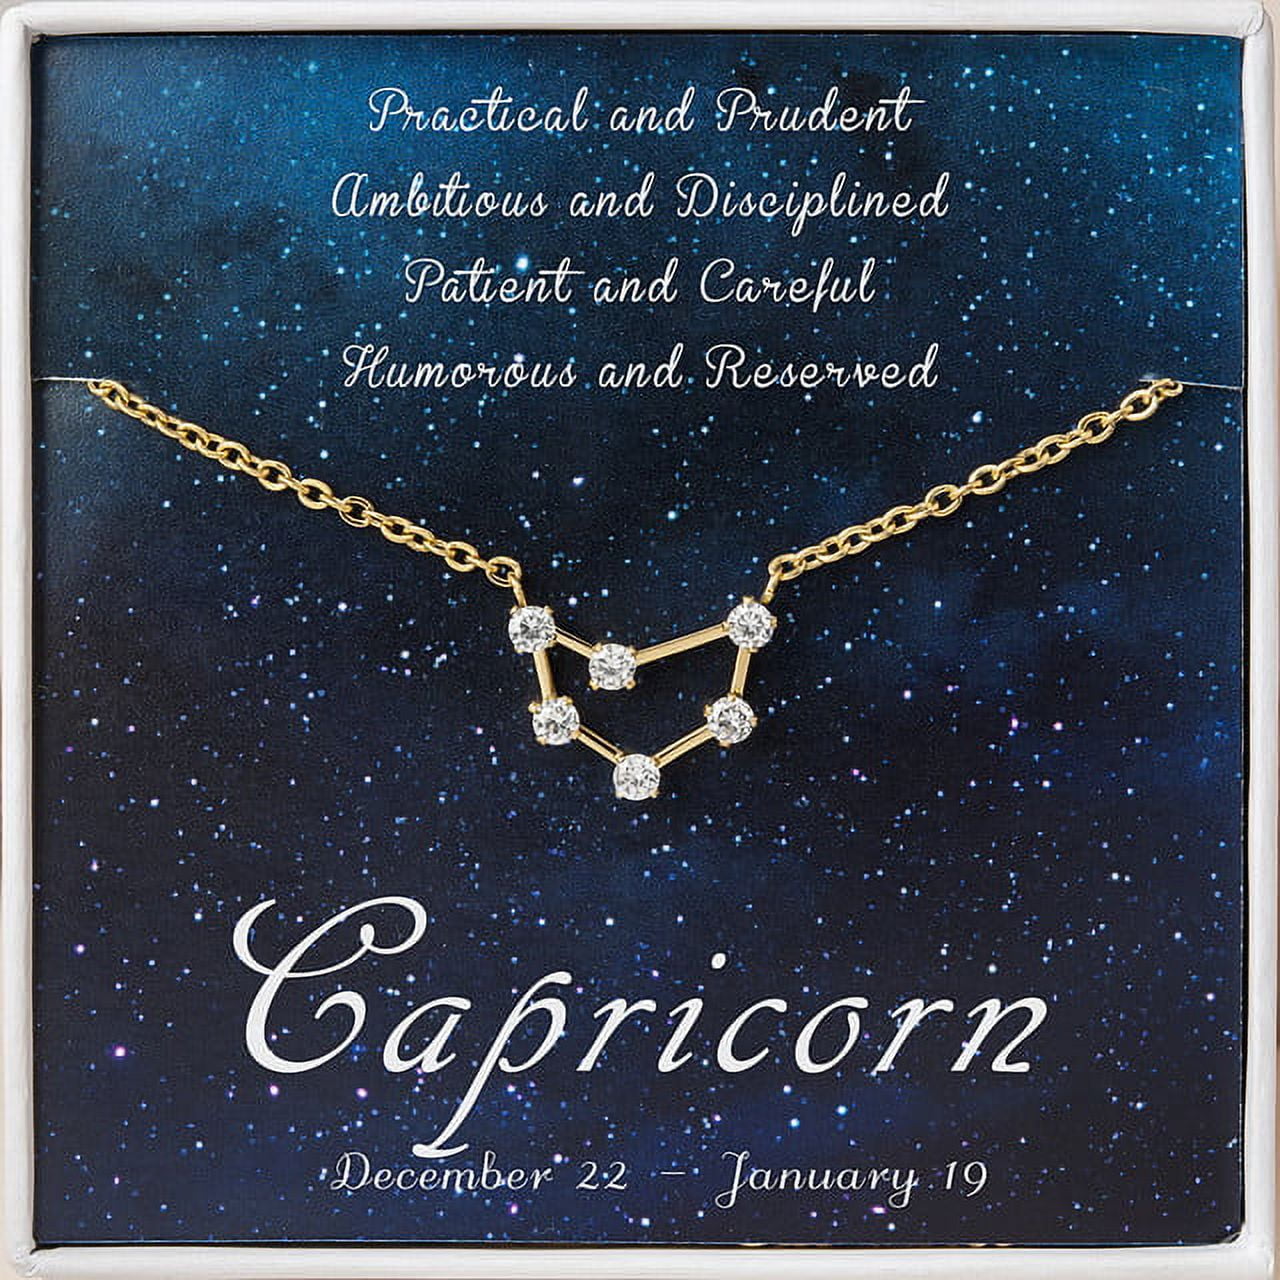 Cancer Constellation Necklace – The Spiritual Planet